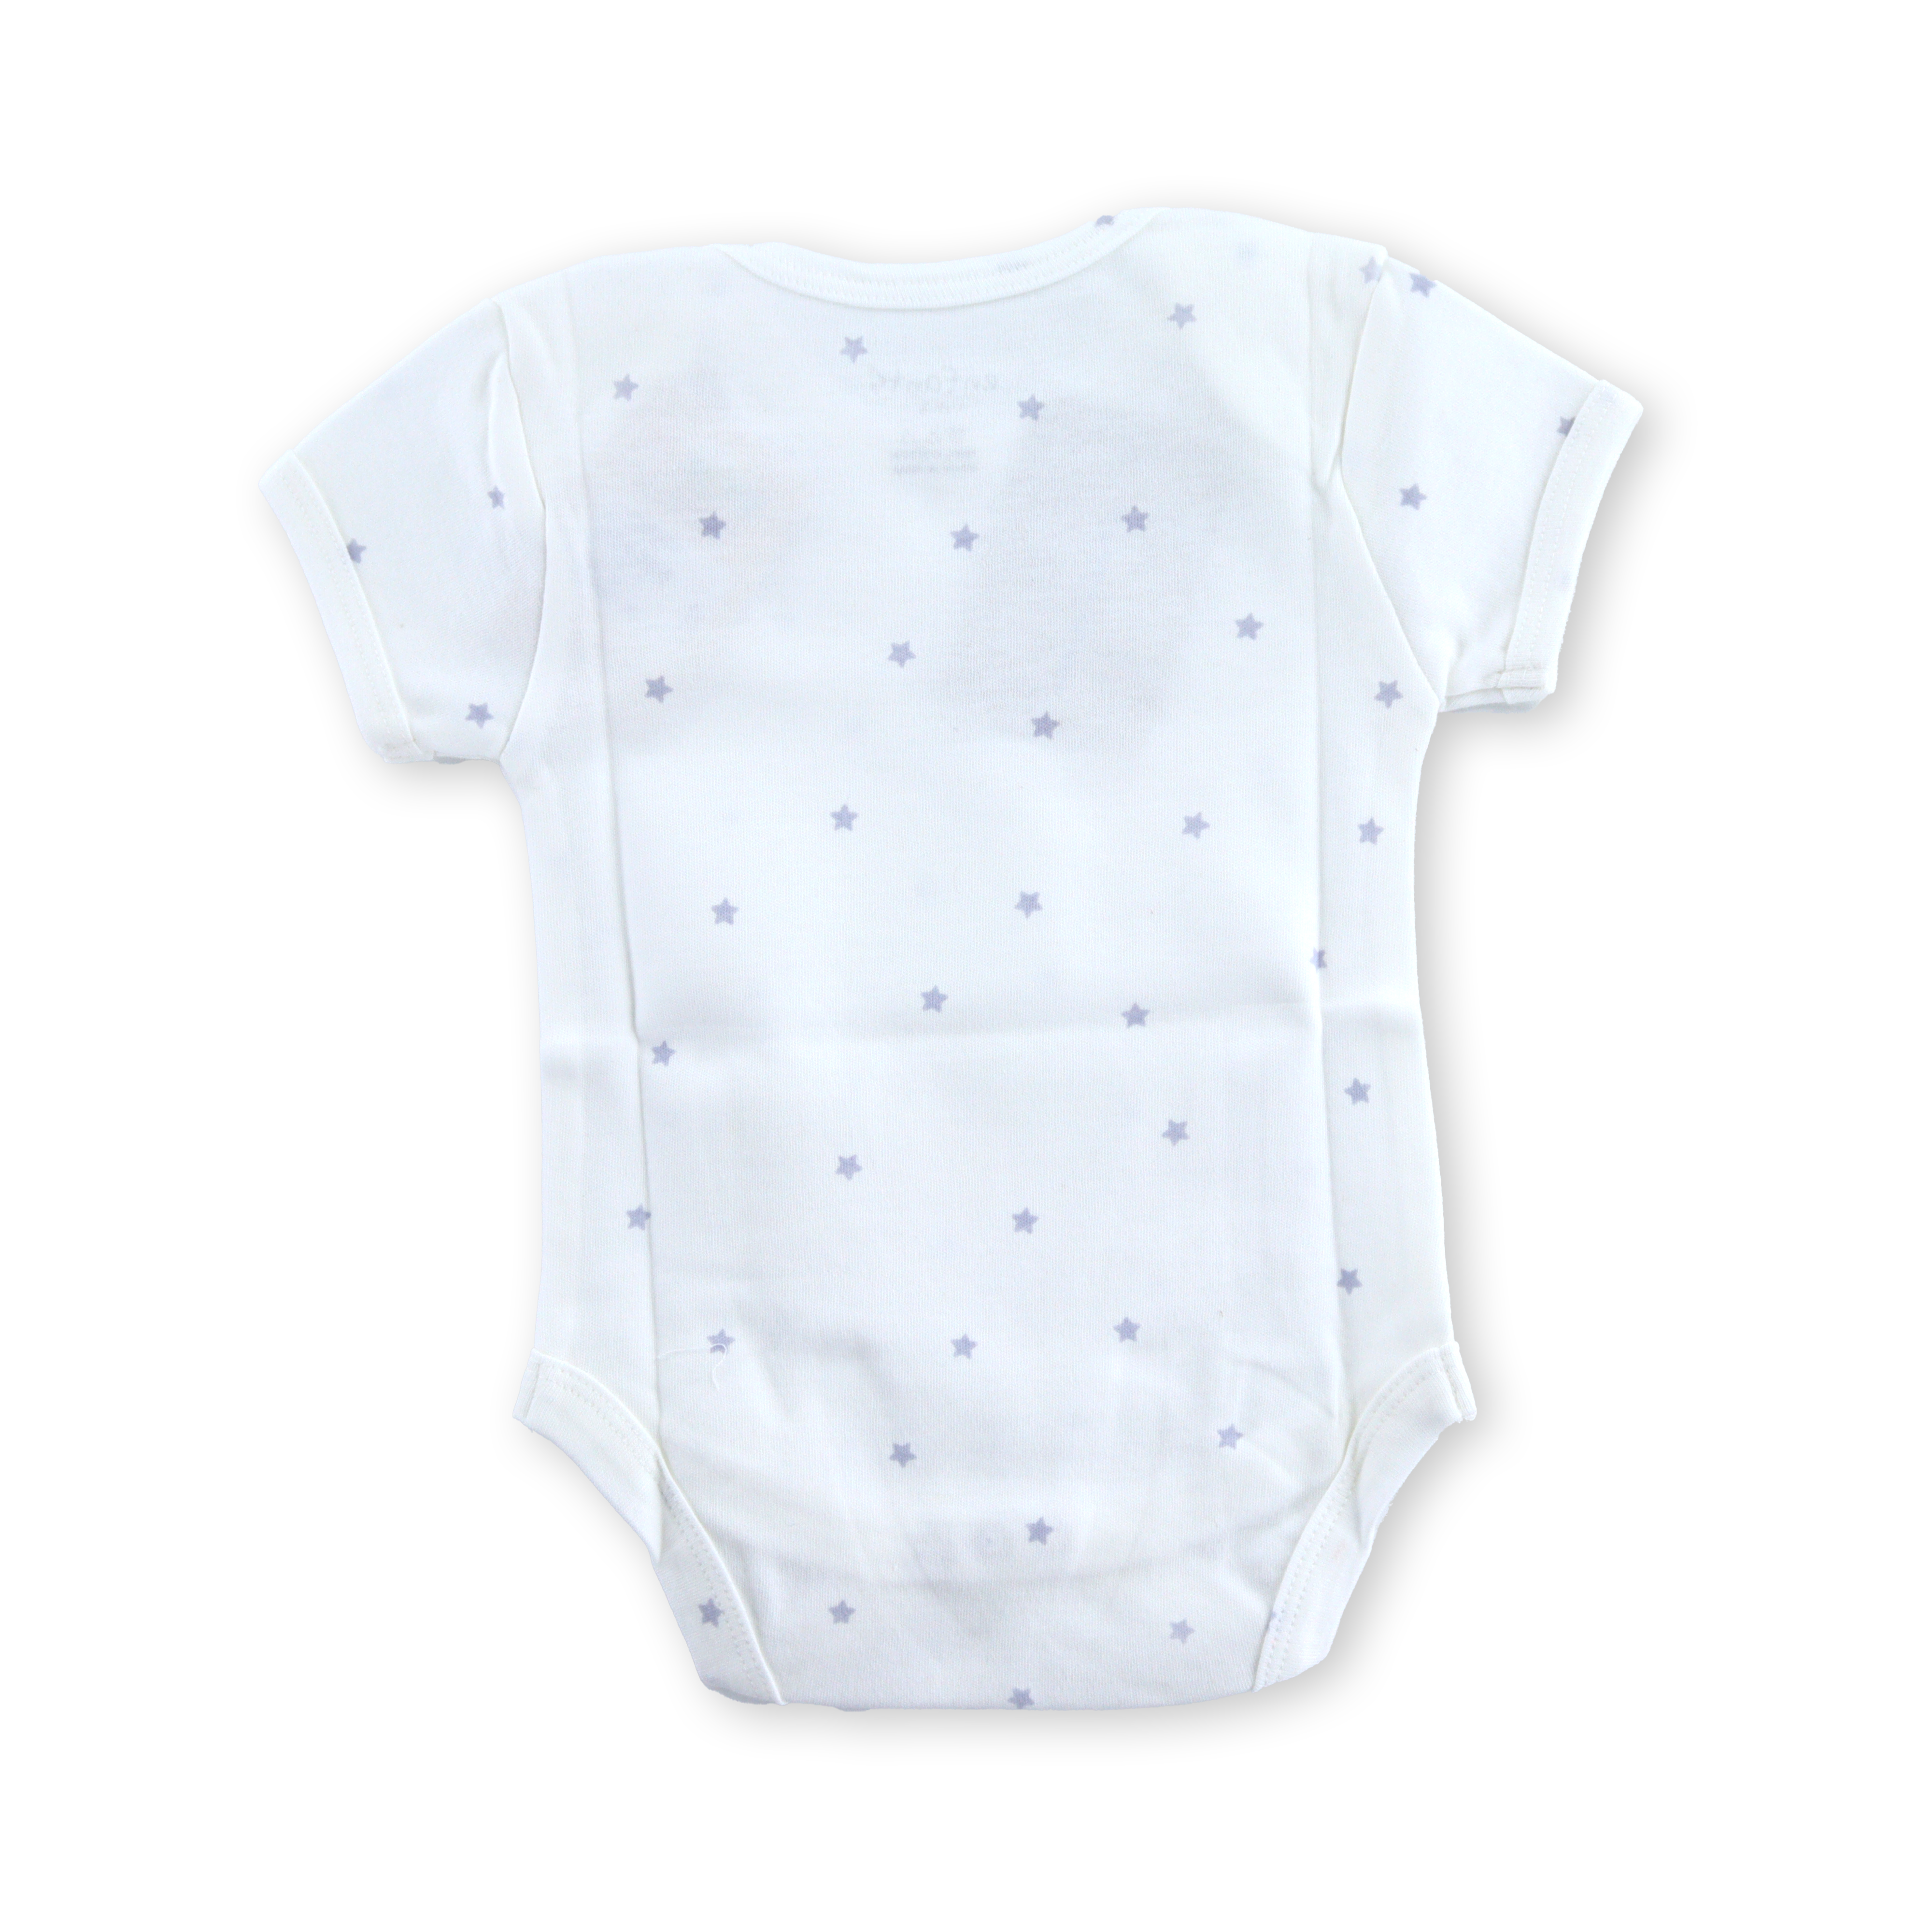 Infants Baby Romper/Onesies/Jumpsuit with Soft Cotton for Baby Boys/Girls (0-3months/3-6months)